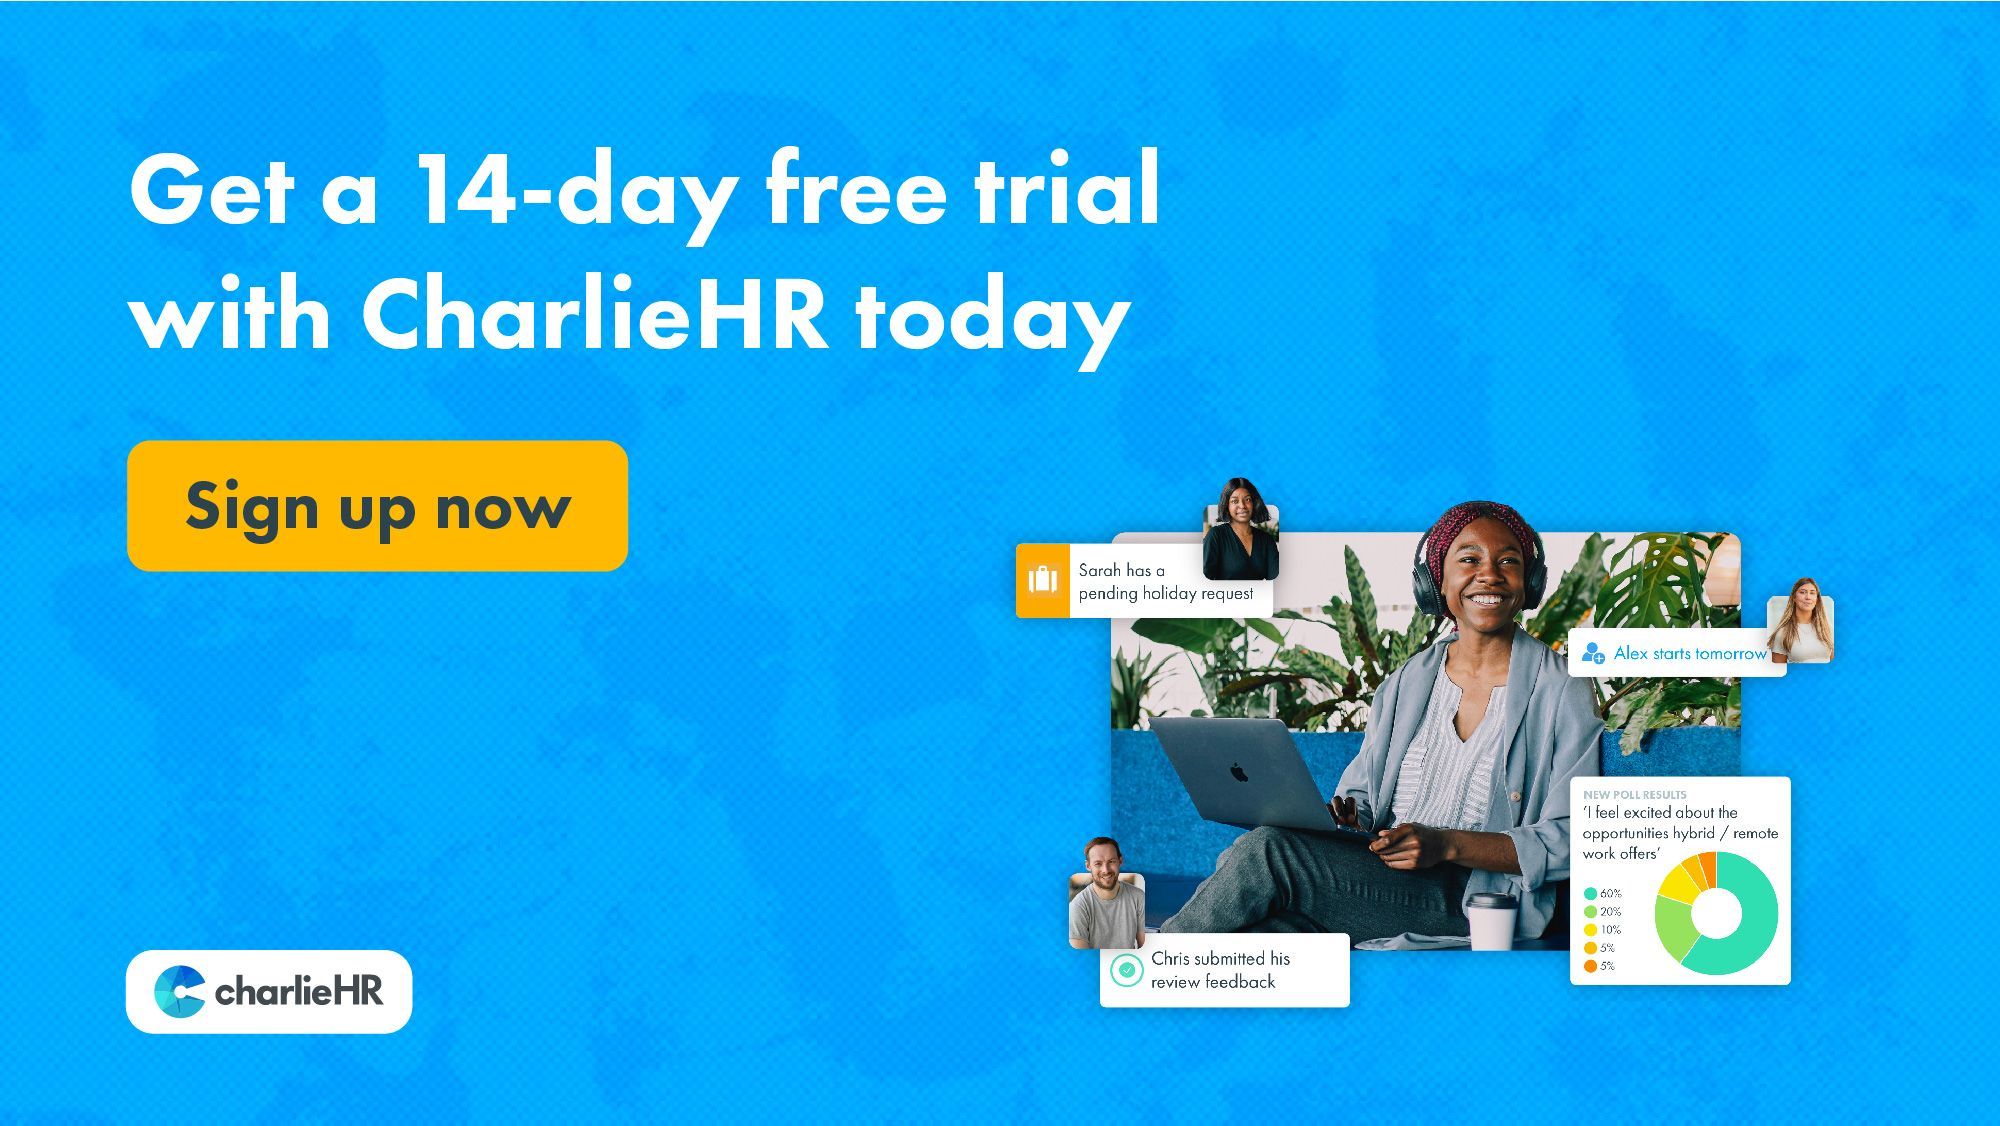 Click here to sign up for a 14-day free trial with CharlieHR. No credit card required.